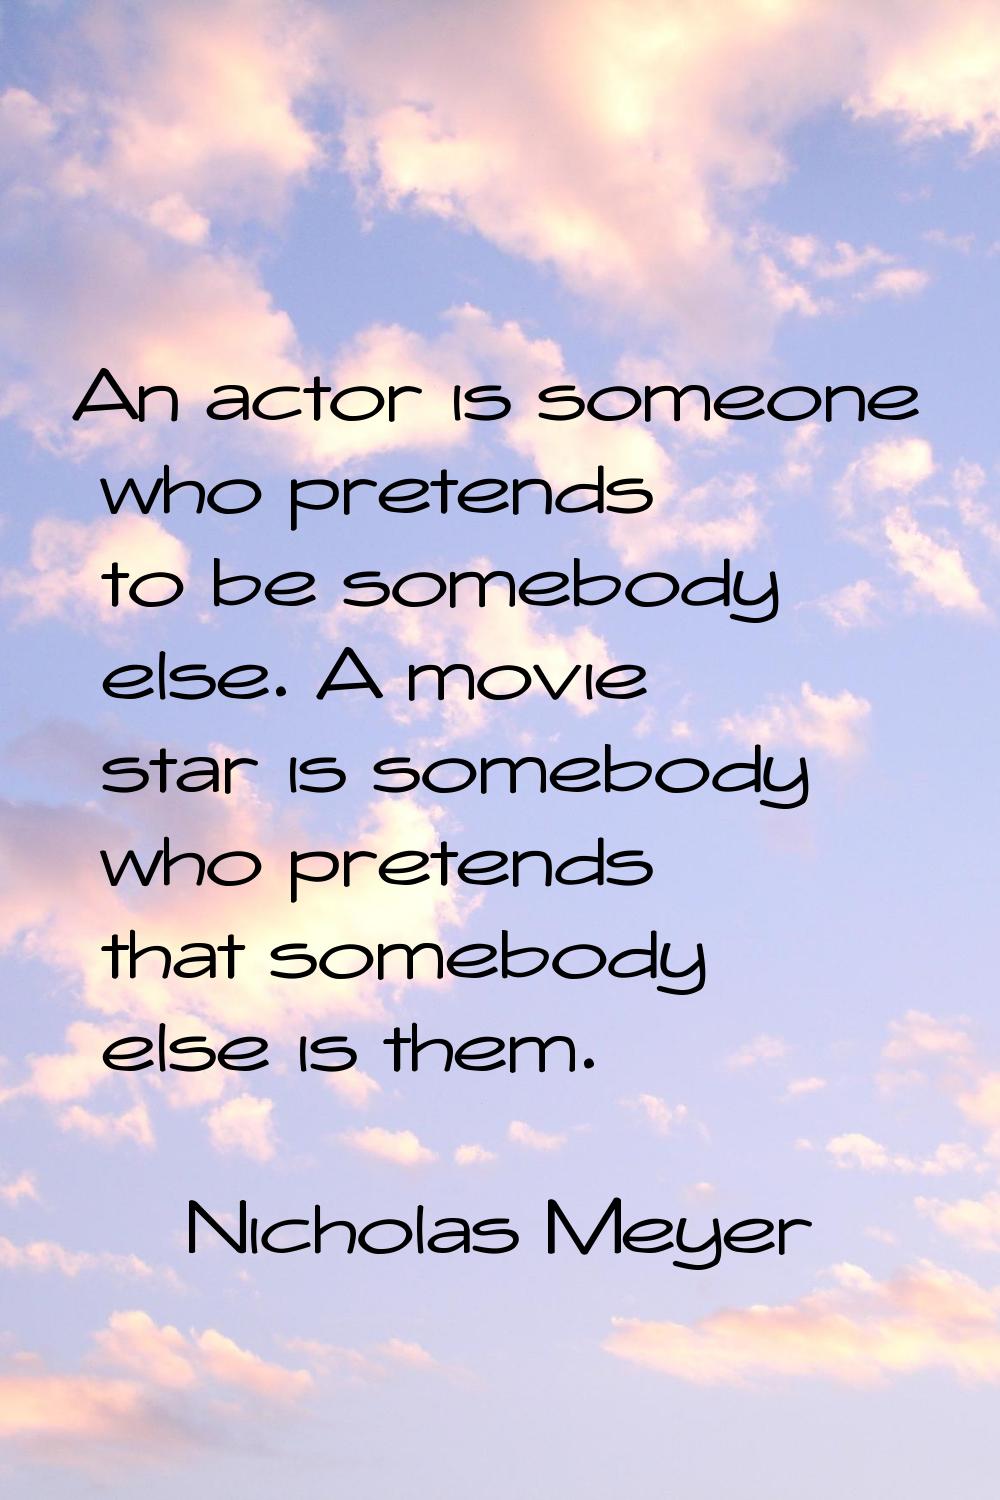 An actor is someone who pretends to be somebody else. A movie star is somebody who pretends that so